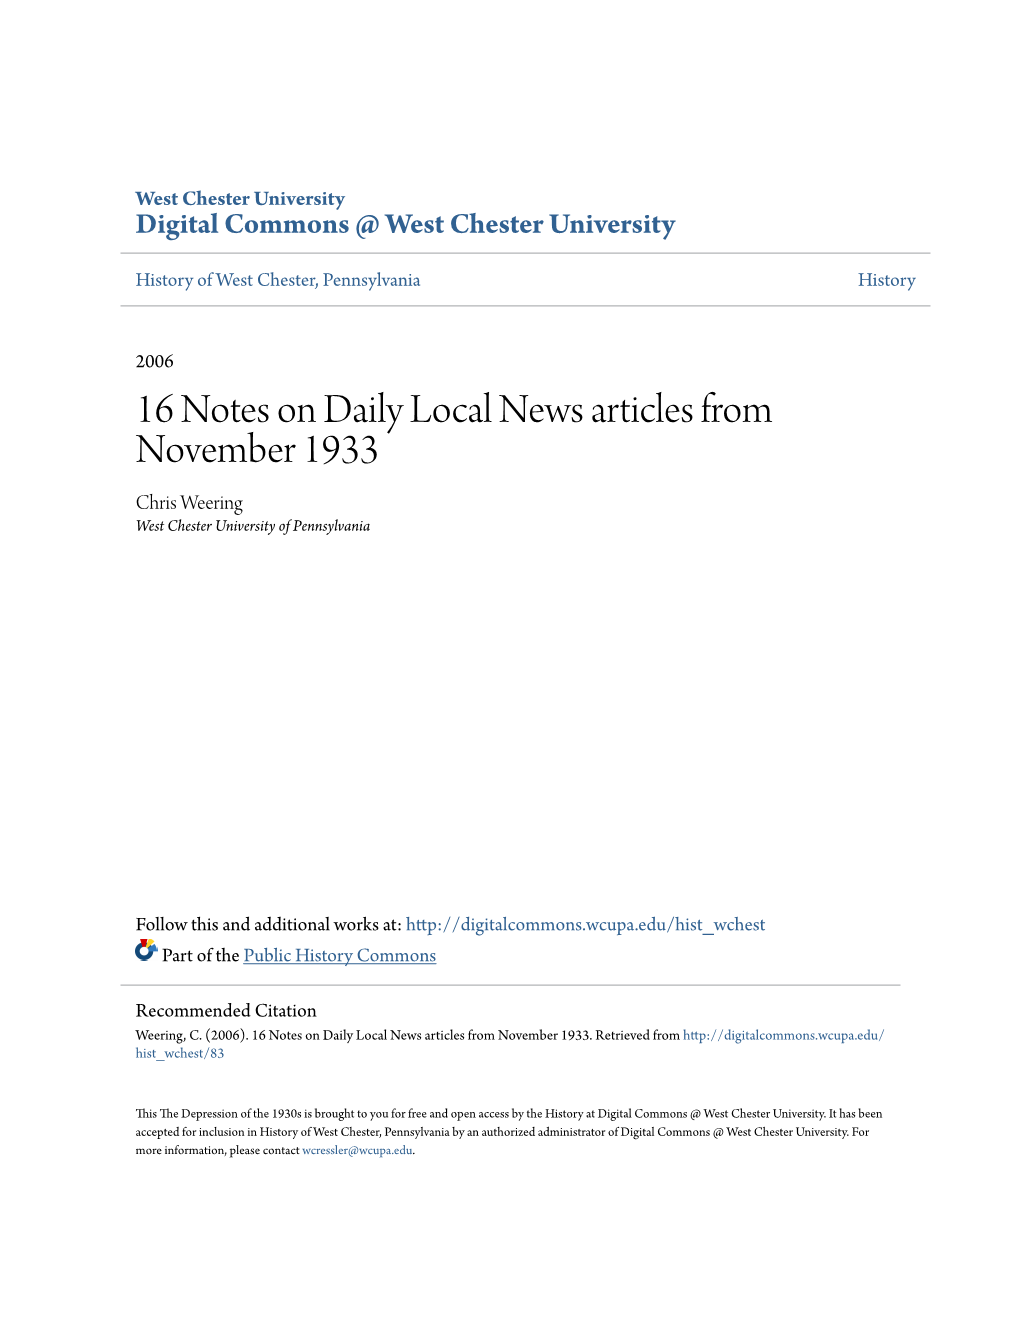 16 Notes on Daily Local News Articles from November 1933 Chris Weering West Chester University of Pennsylvania